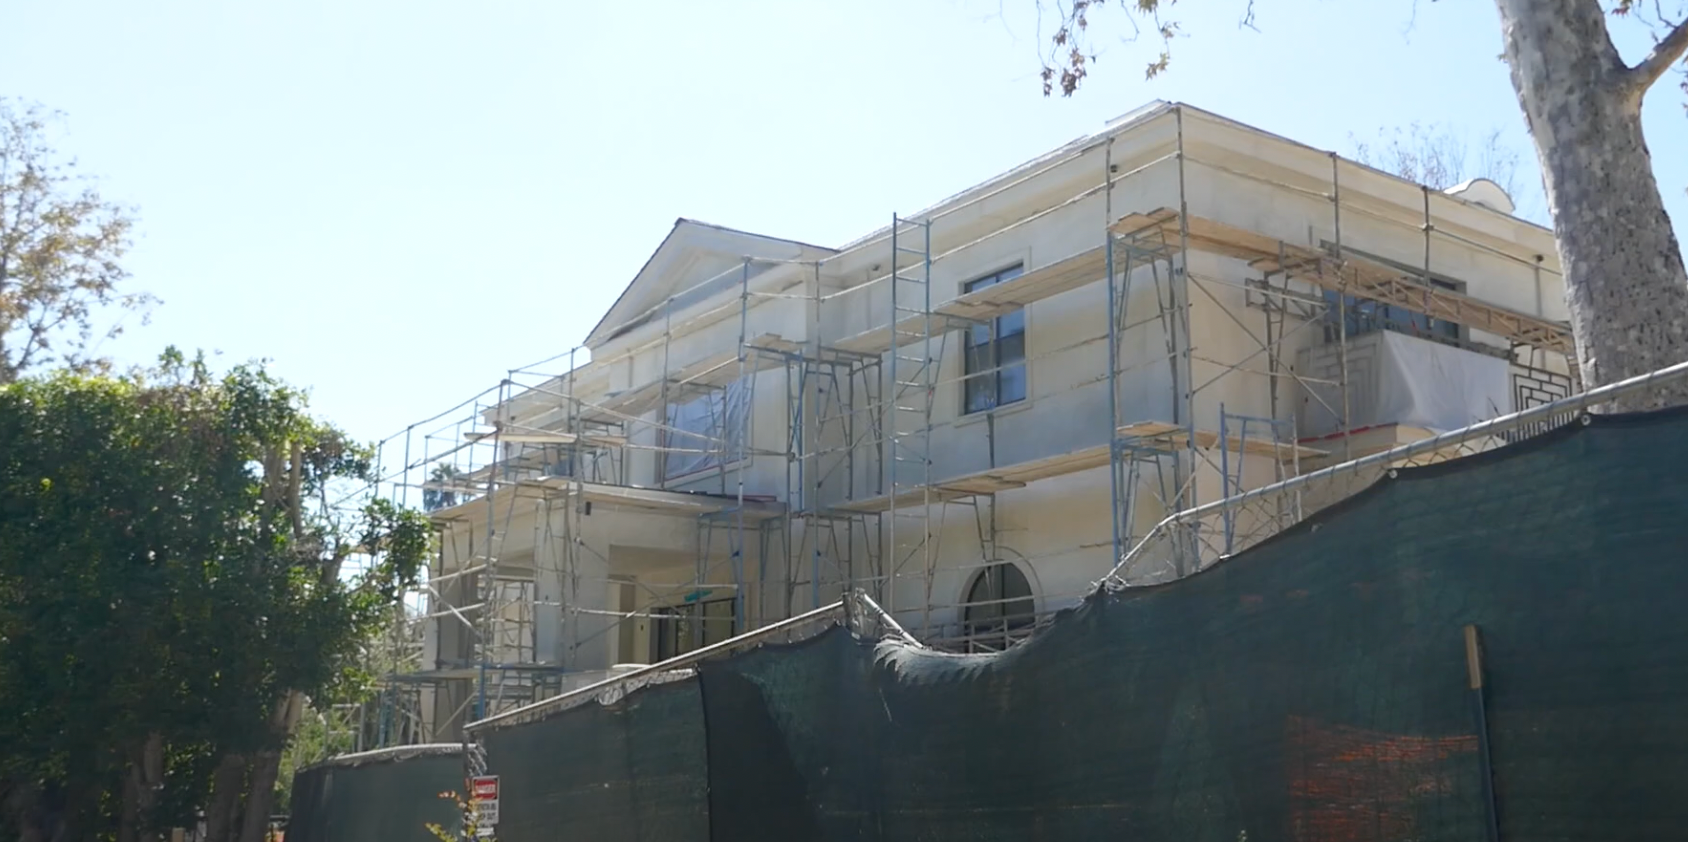 Joyce DeWitt's former home pictured on August 27, 2022 in Beverly Hills, California | Source: YouTube/barryking